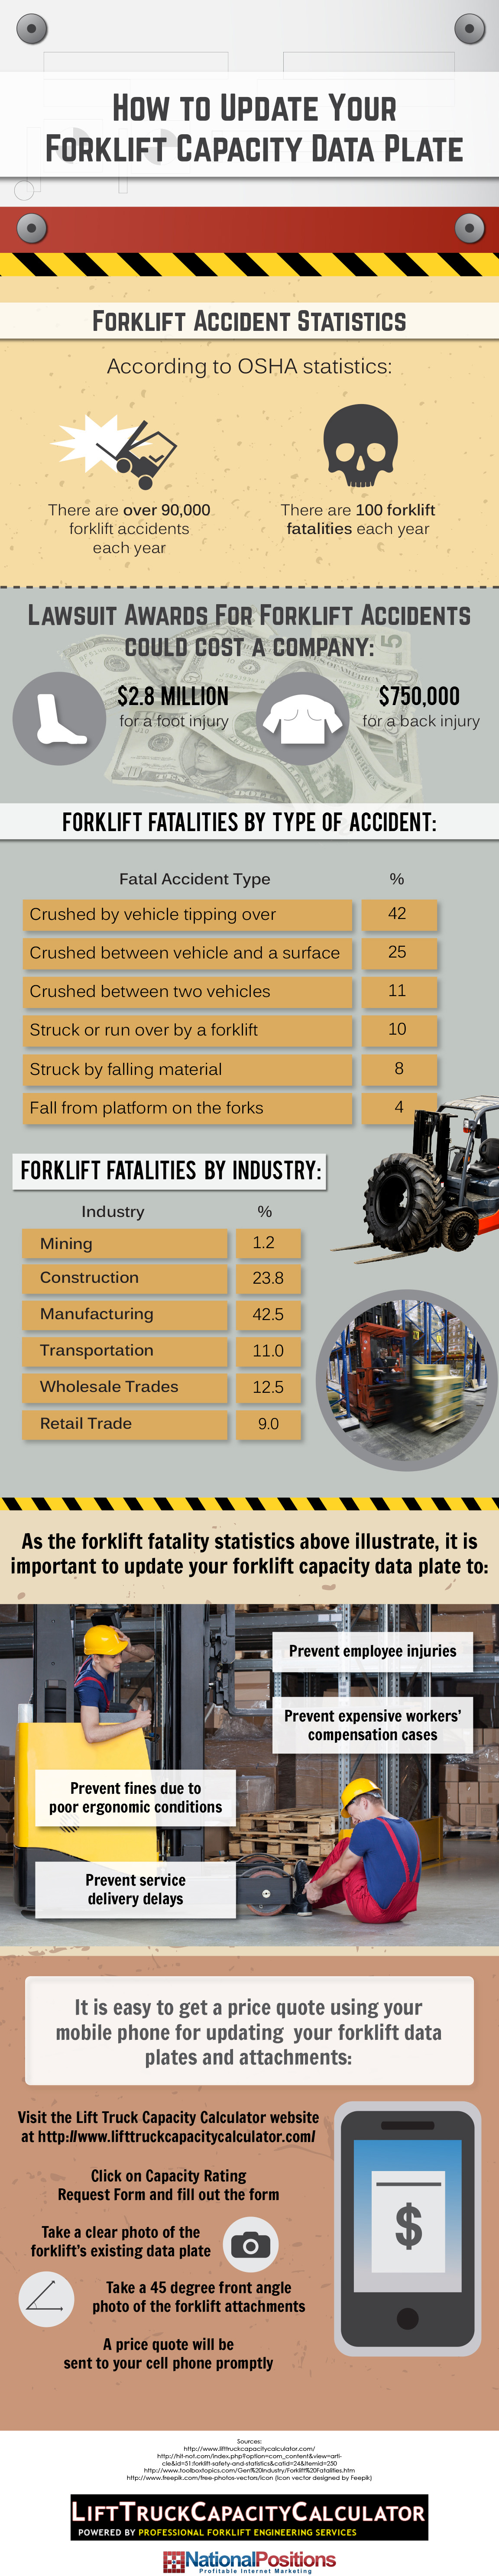 How to Update Your Forklift Capacity Data Plate